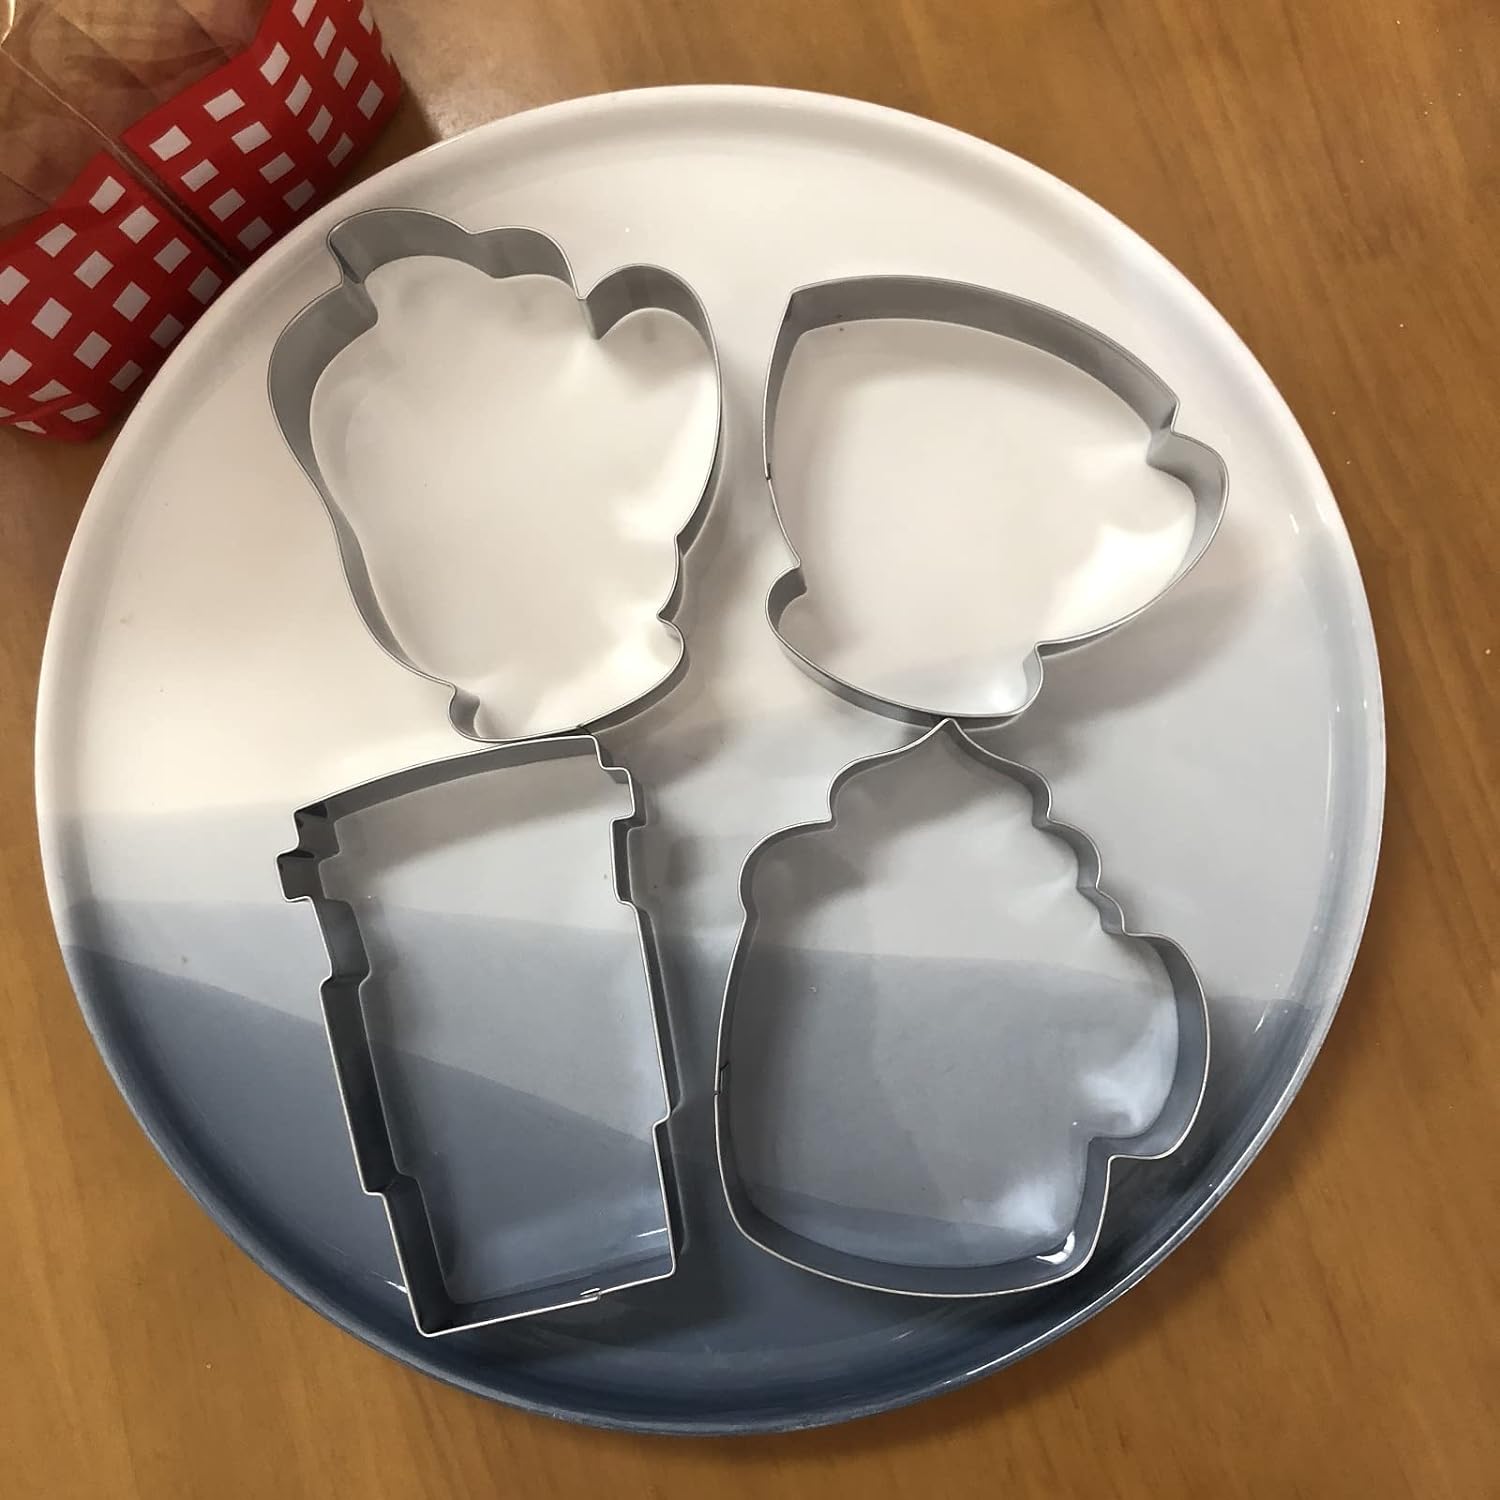 Great Choice Products Large Coffee Cup Cookie Cutter Set-4 Piece-Coffee Mug, Hot Cocoa Mug, Lette, Teacup Cookie Fondant Biscui Cutters